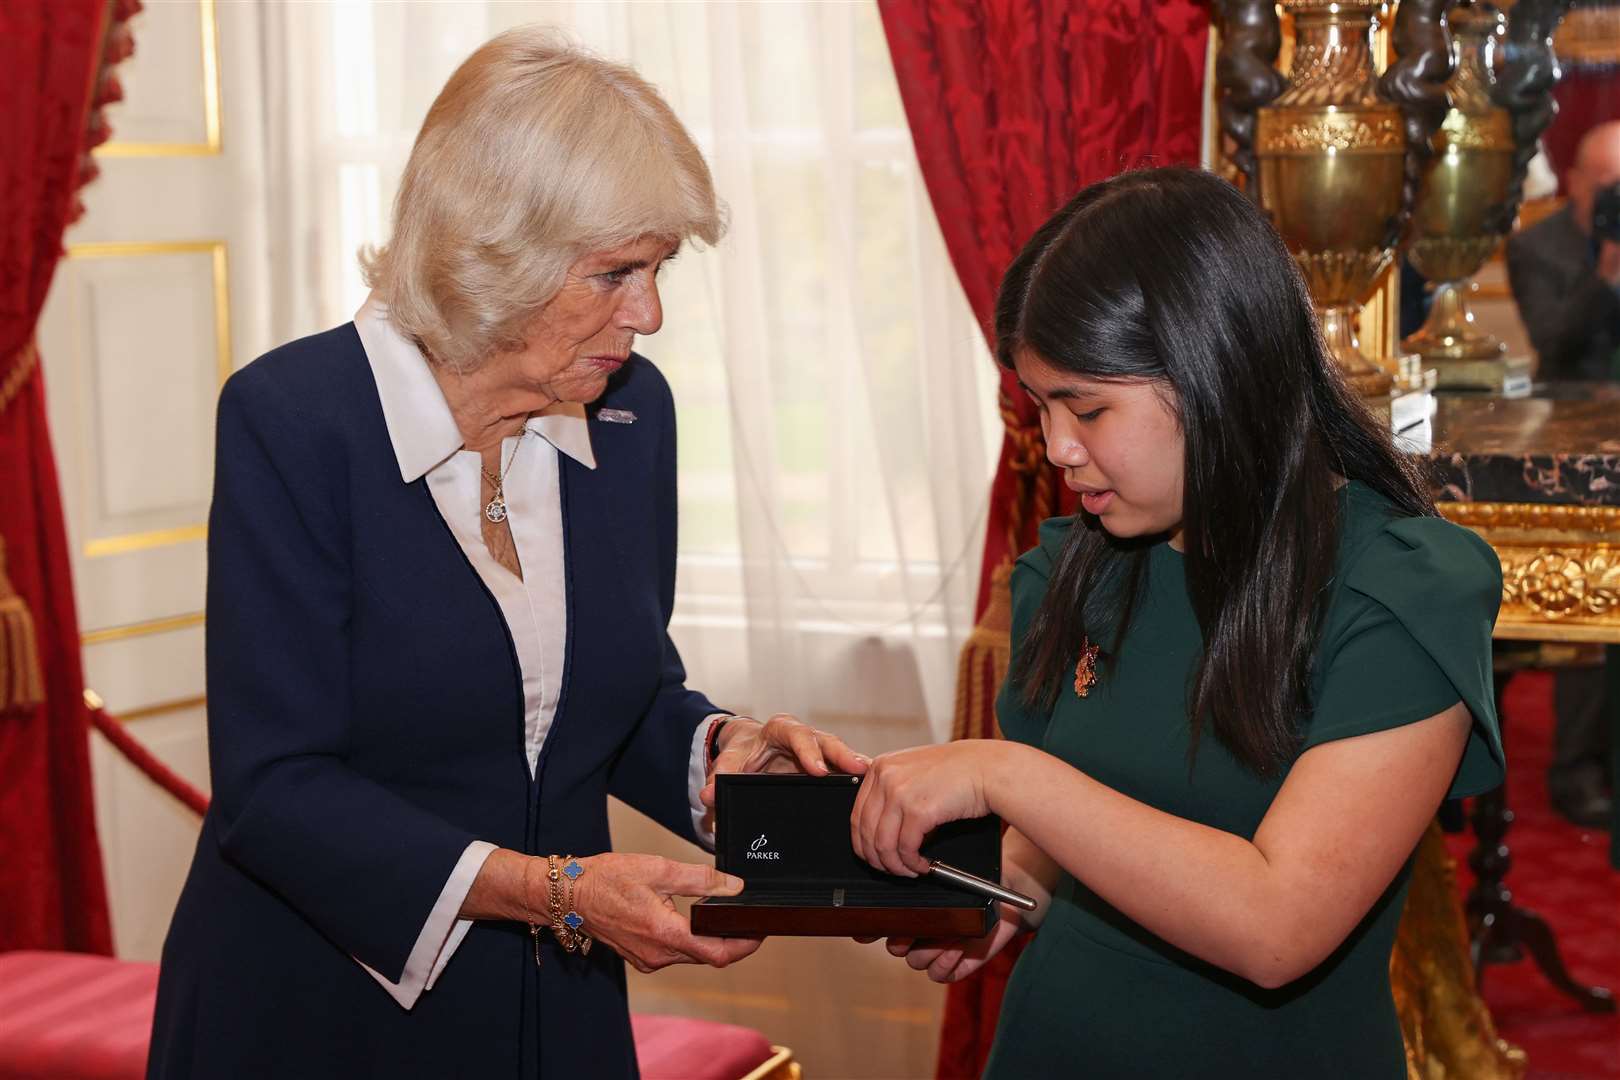 The Duchess of Cornwall presents Junior Winner from 2020, Cassandra Nguyen with a pen during the awards ceremony (Chris Jackson/PA)